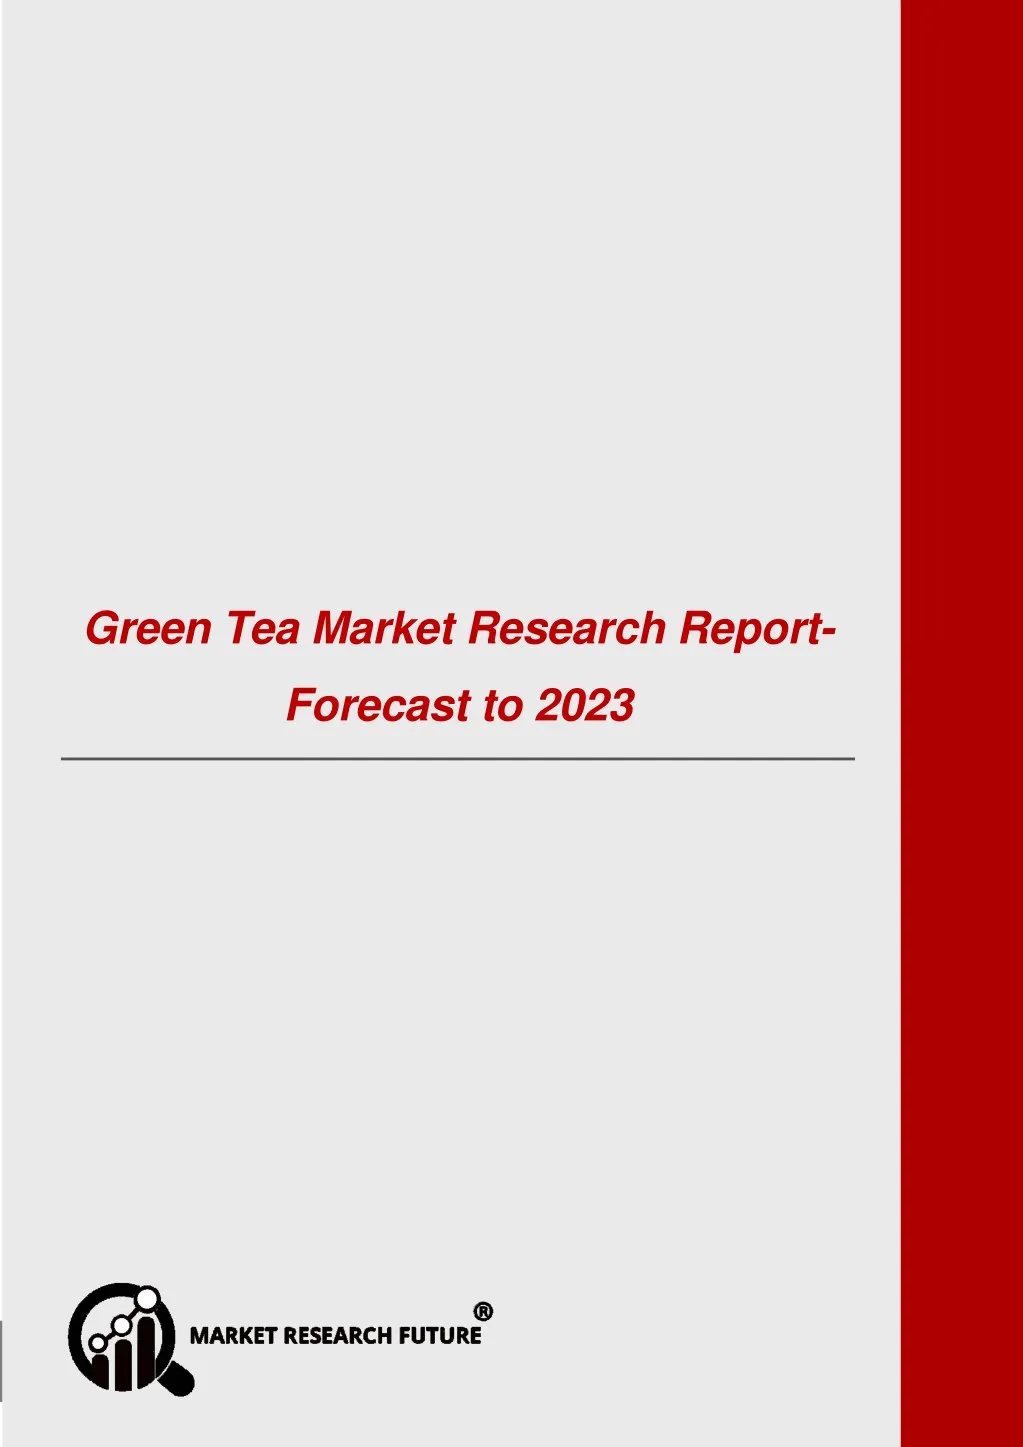 green tea market research report forecast to 2023